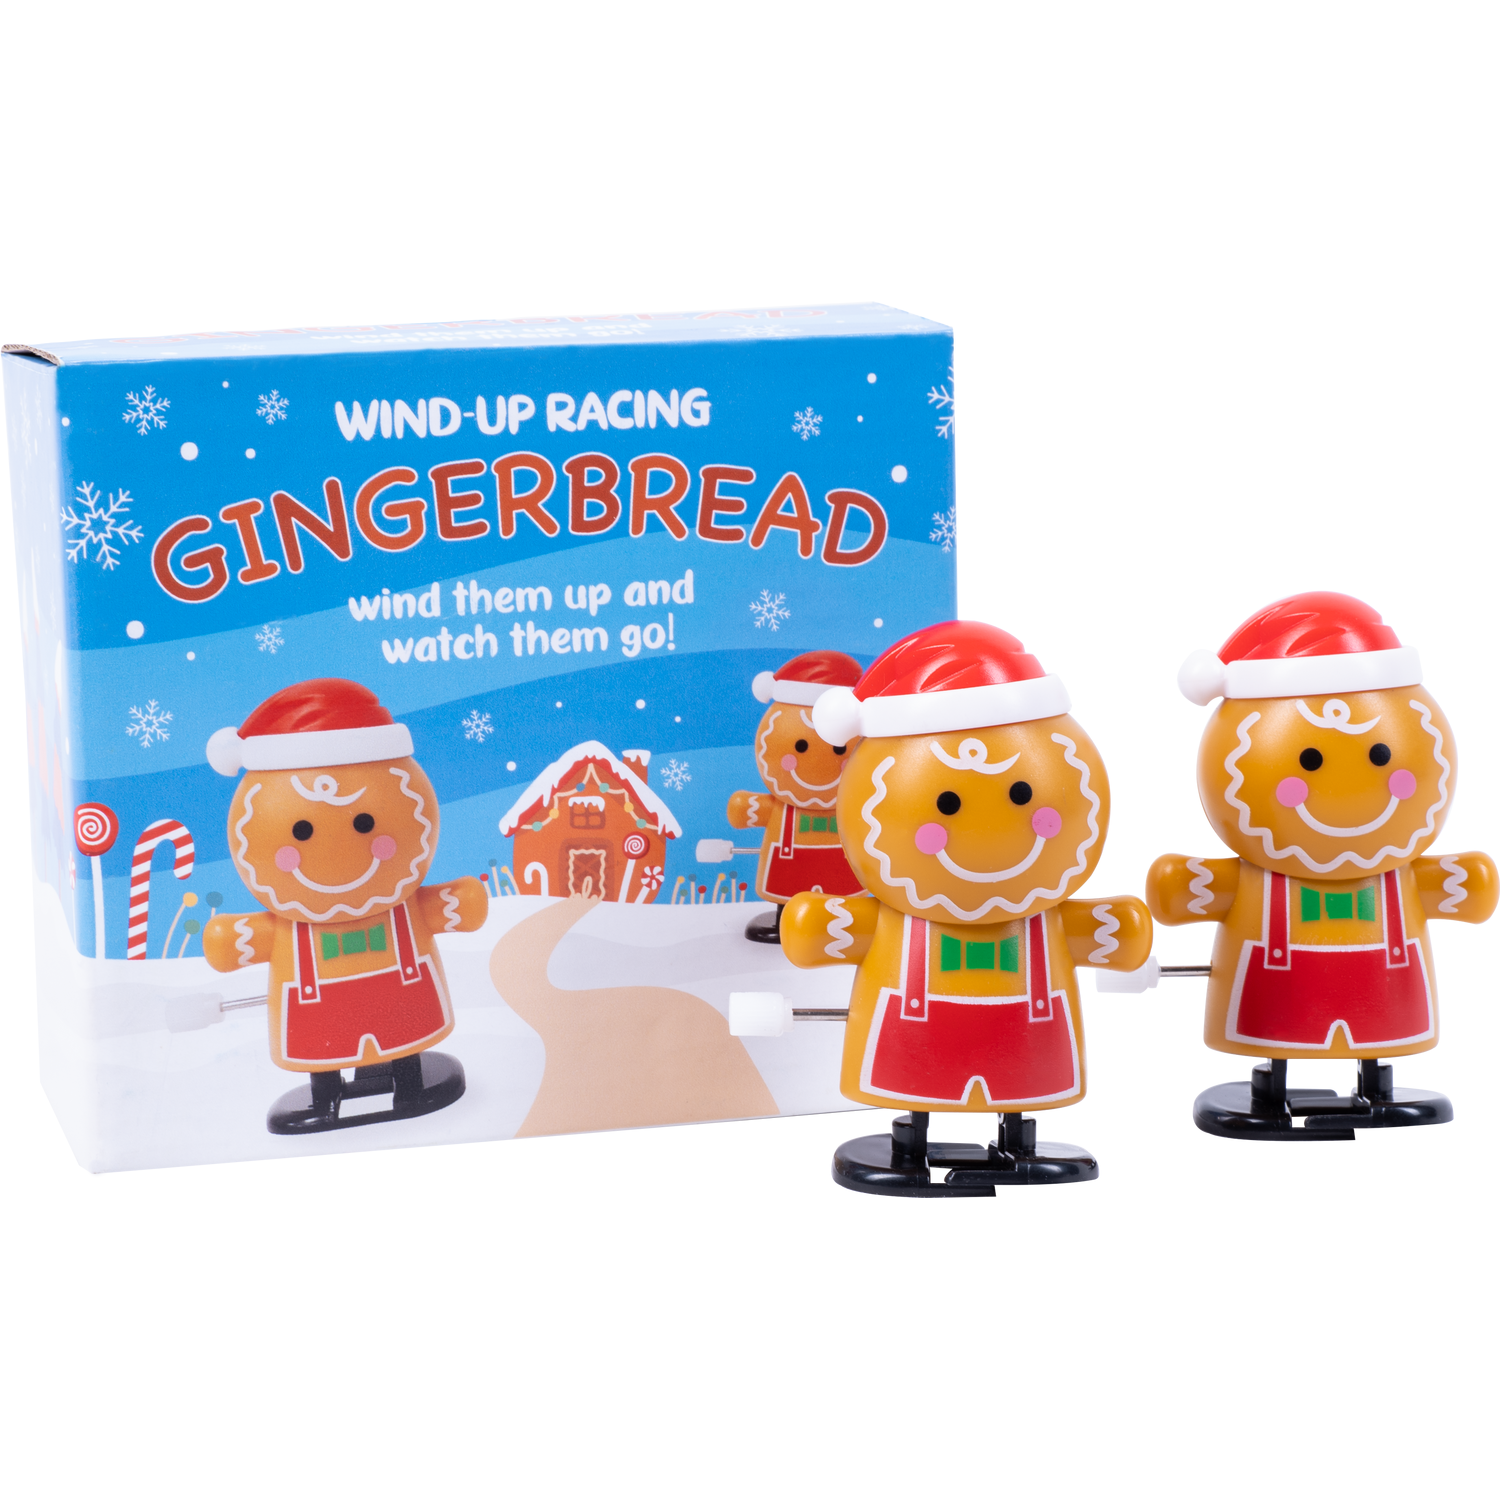 Wind-Up Racing Gingerbread Toy 2 Pack Image 3